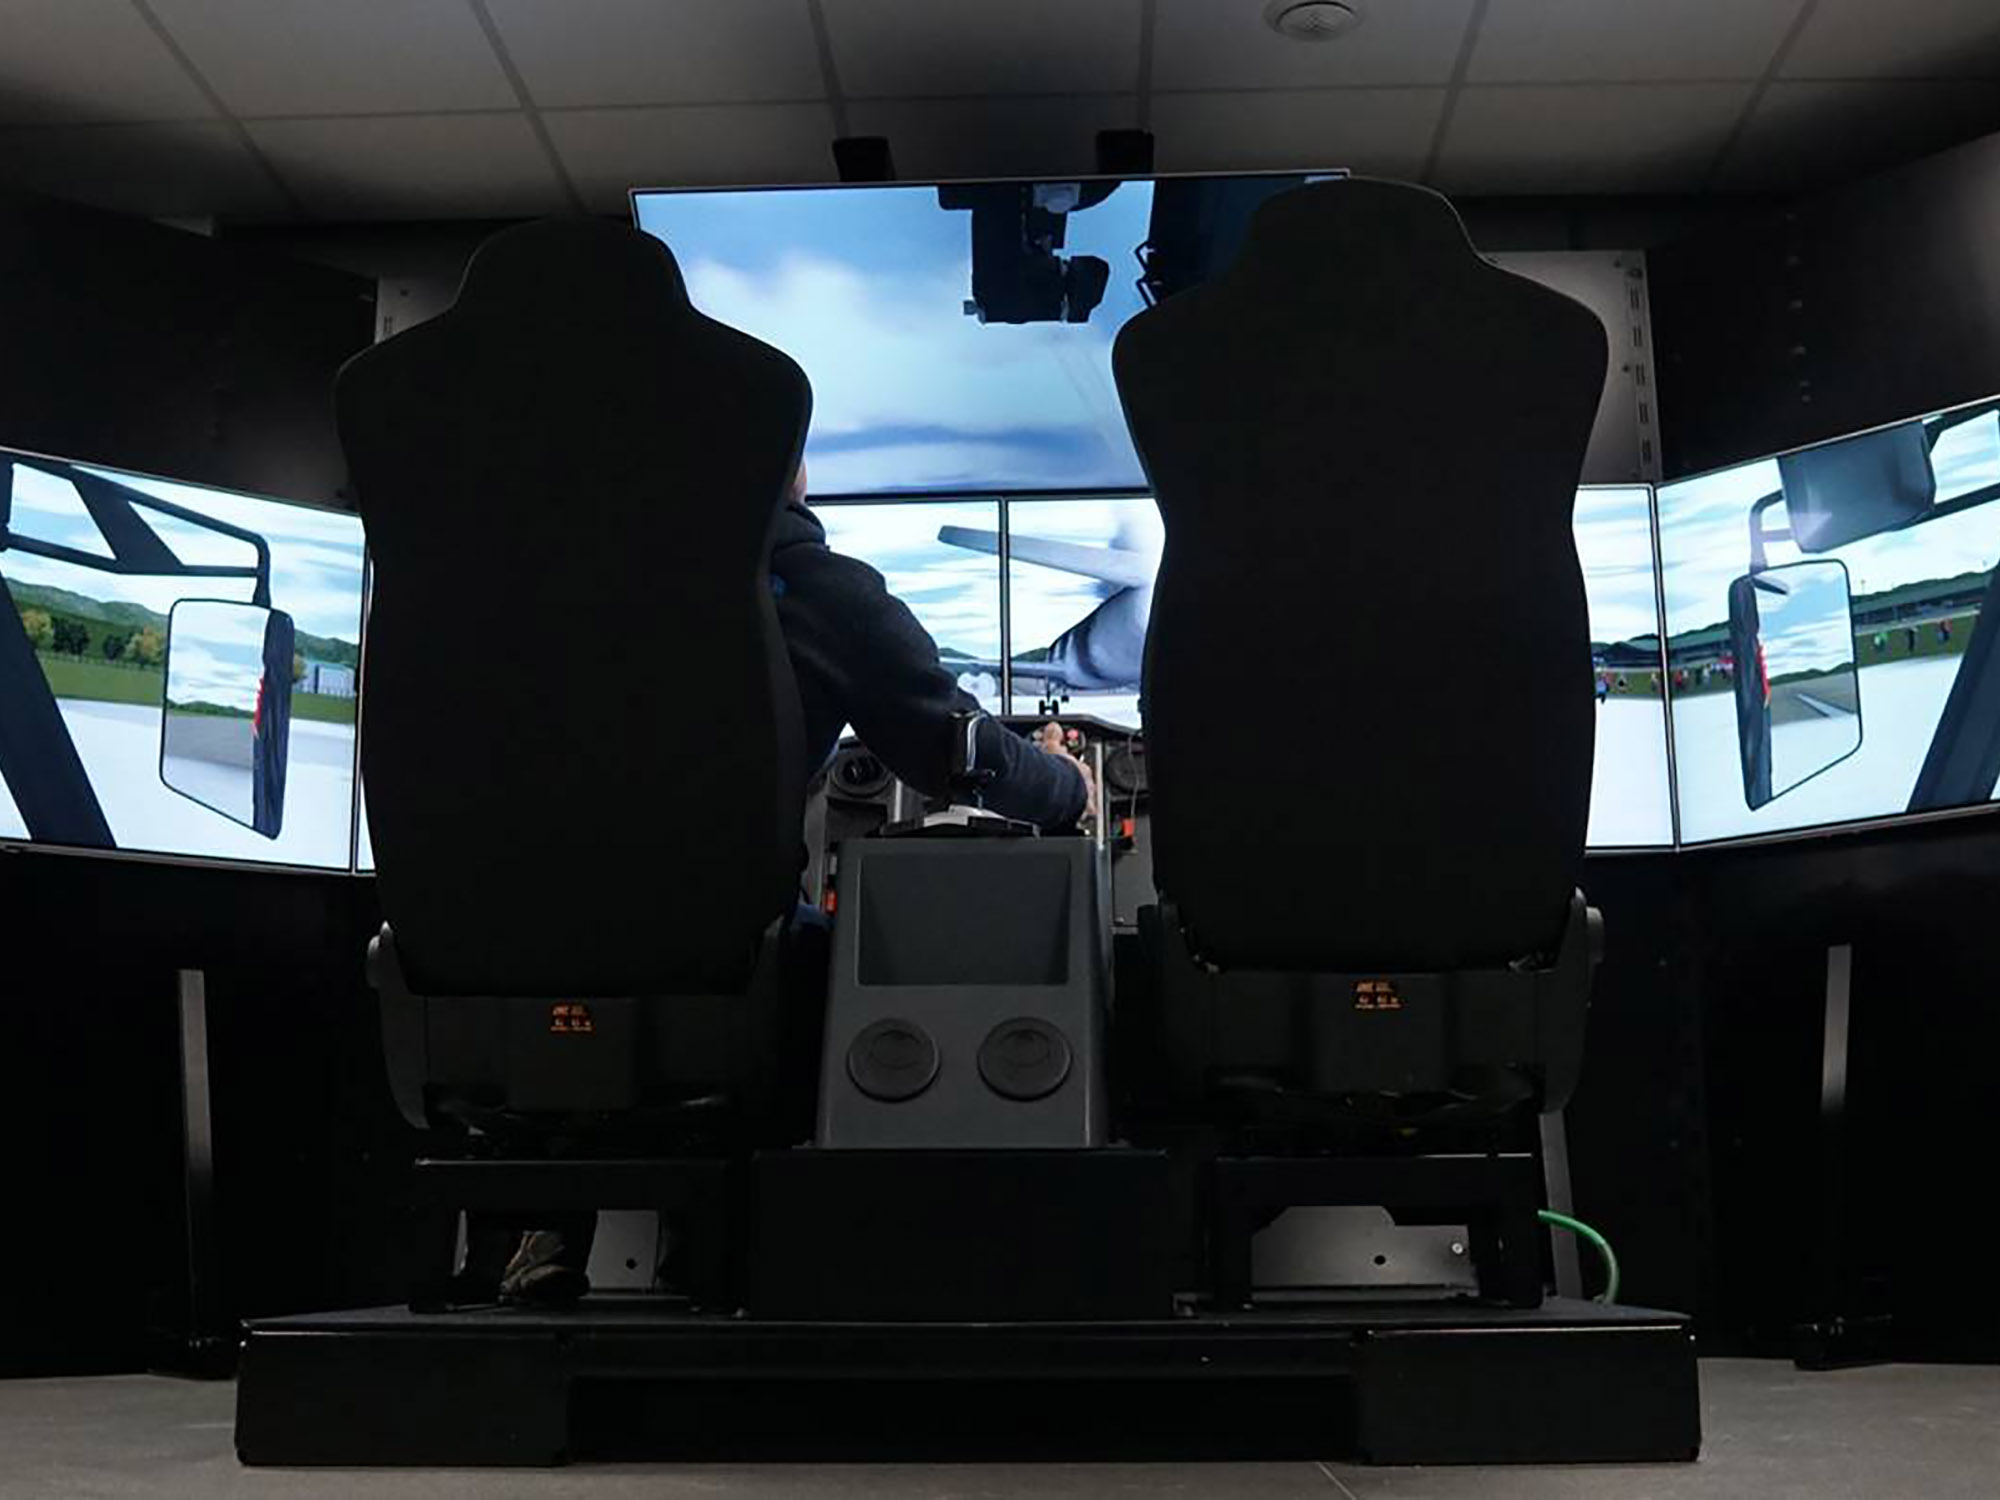 Firefighter operating the roof turret on the ARFF minicab simulator, 5 screens surround him for an immersive experience.